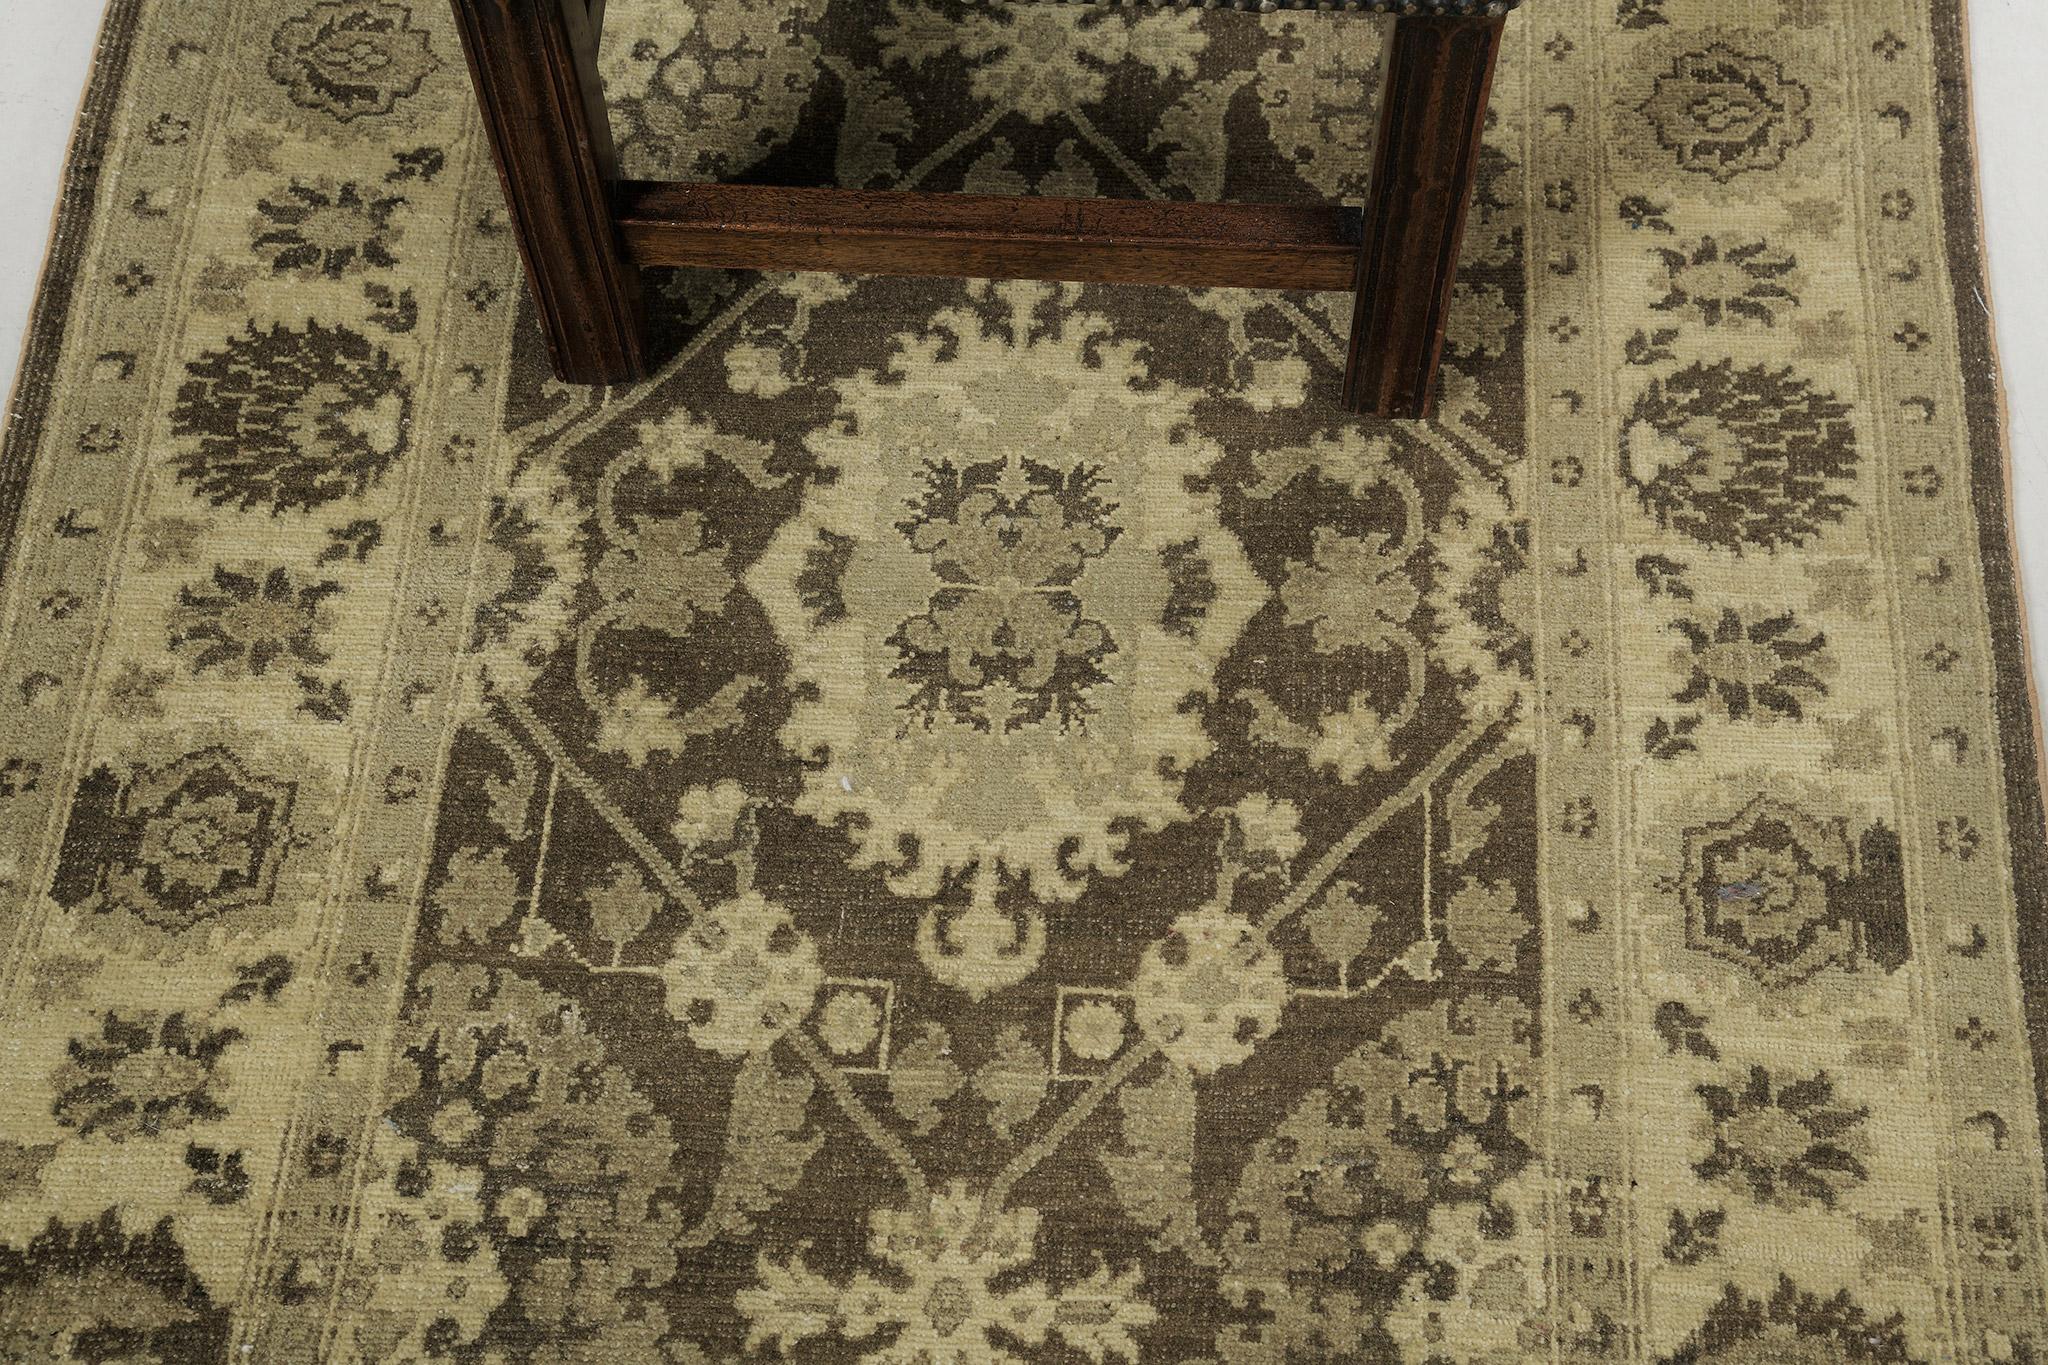 This majestic Mahal rug revival has created an outstanding pattern. It features well-coordinated neutral tones of mocha, black, and cream. This elegant rug is composed of enchanting peonies, lotus, and motifs forming a symmetrical pattern in the